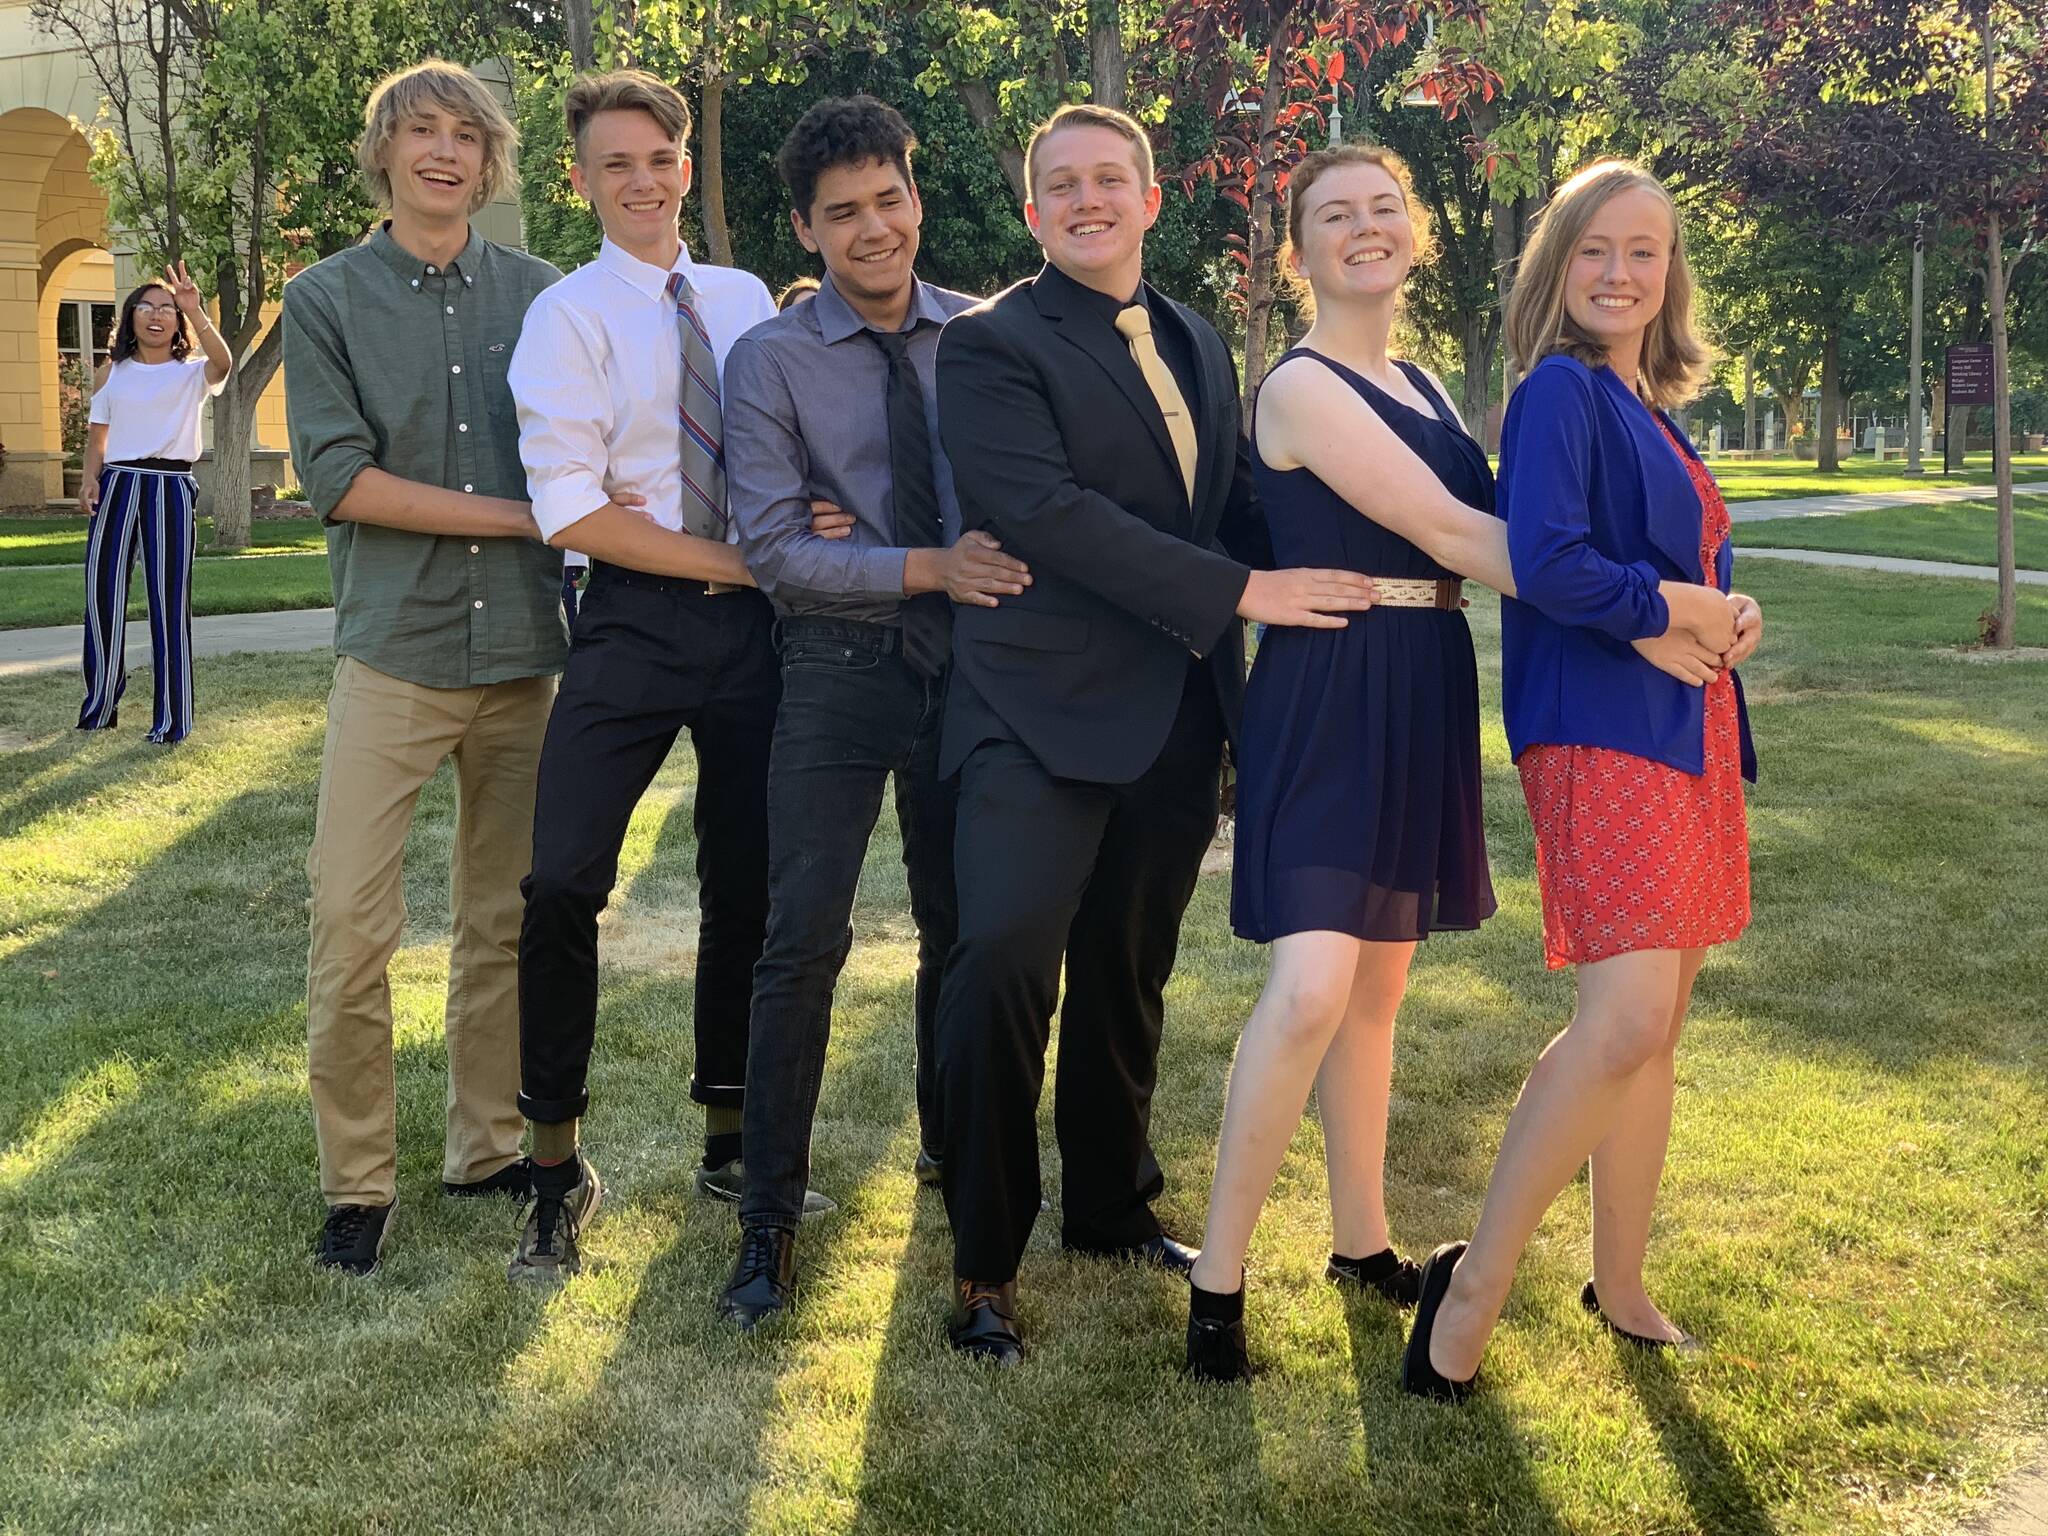 Contributed photo by OPALCO
The 2019 delegation included (from left to right) Tashi Litch, Lichen Johnson, Jose Raya, Youth Director, Arlo Harold, Anne Marie Ryan, and Presley Clark.